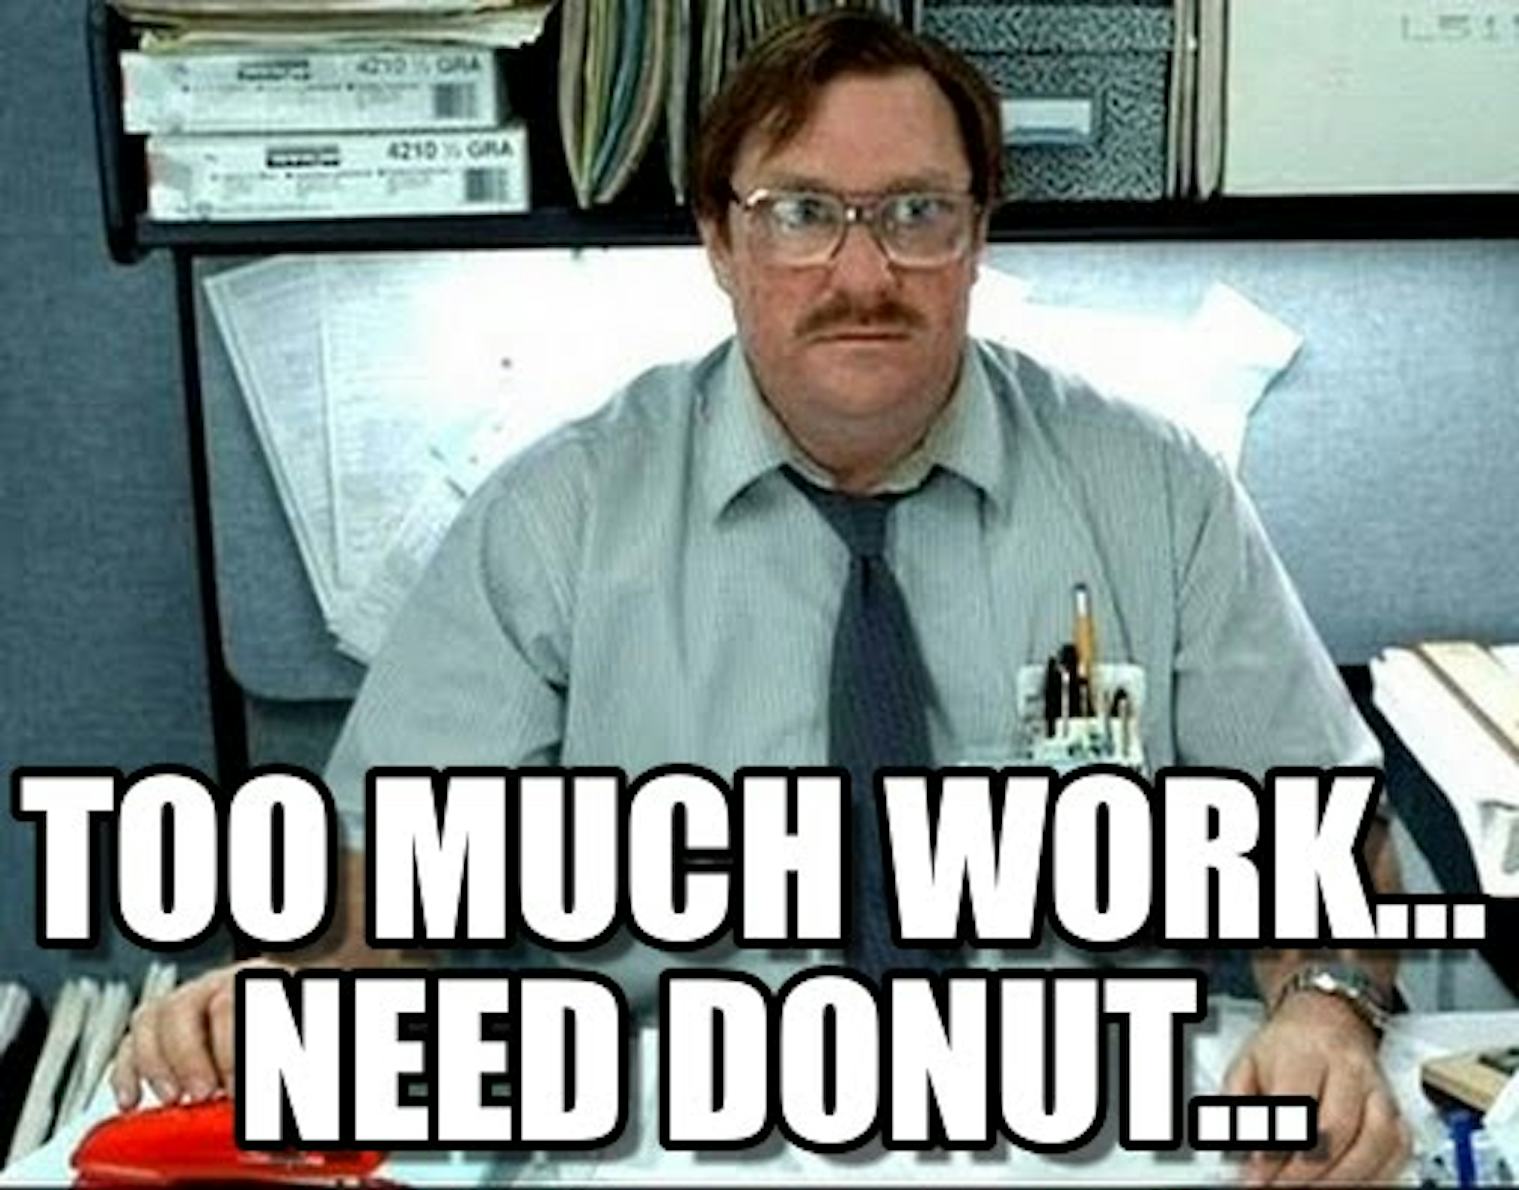 13 Memes About Doughnuts For National Doughnut Day That Will Leave You